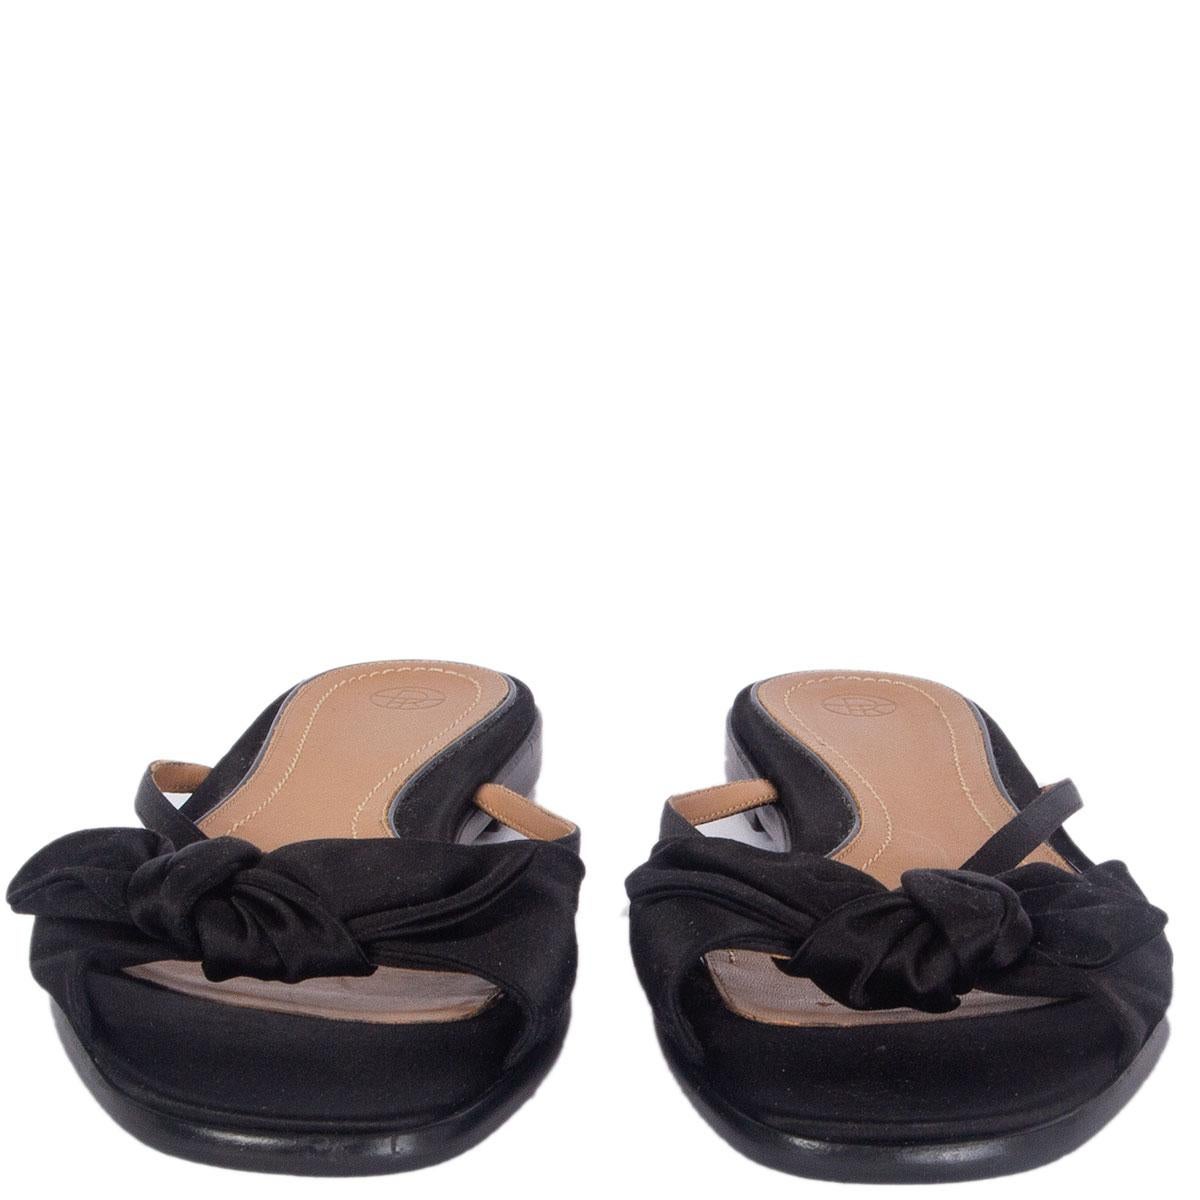 100% authentic The Row April bow slides in black satin. Have been worn and are in excellent condition. 

Imprinted Size	40
Shoe Size	40
Inside Sole	26cm (10.1in)
Width	8cm (3.1in)
Heel	1cm (0.4in)
All our listings include only the listed item unless